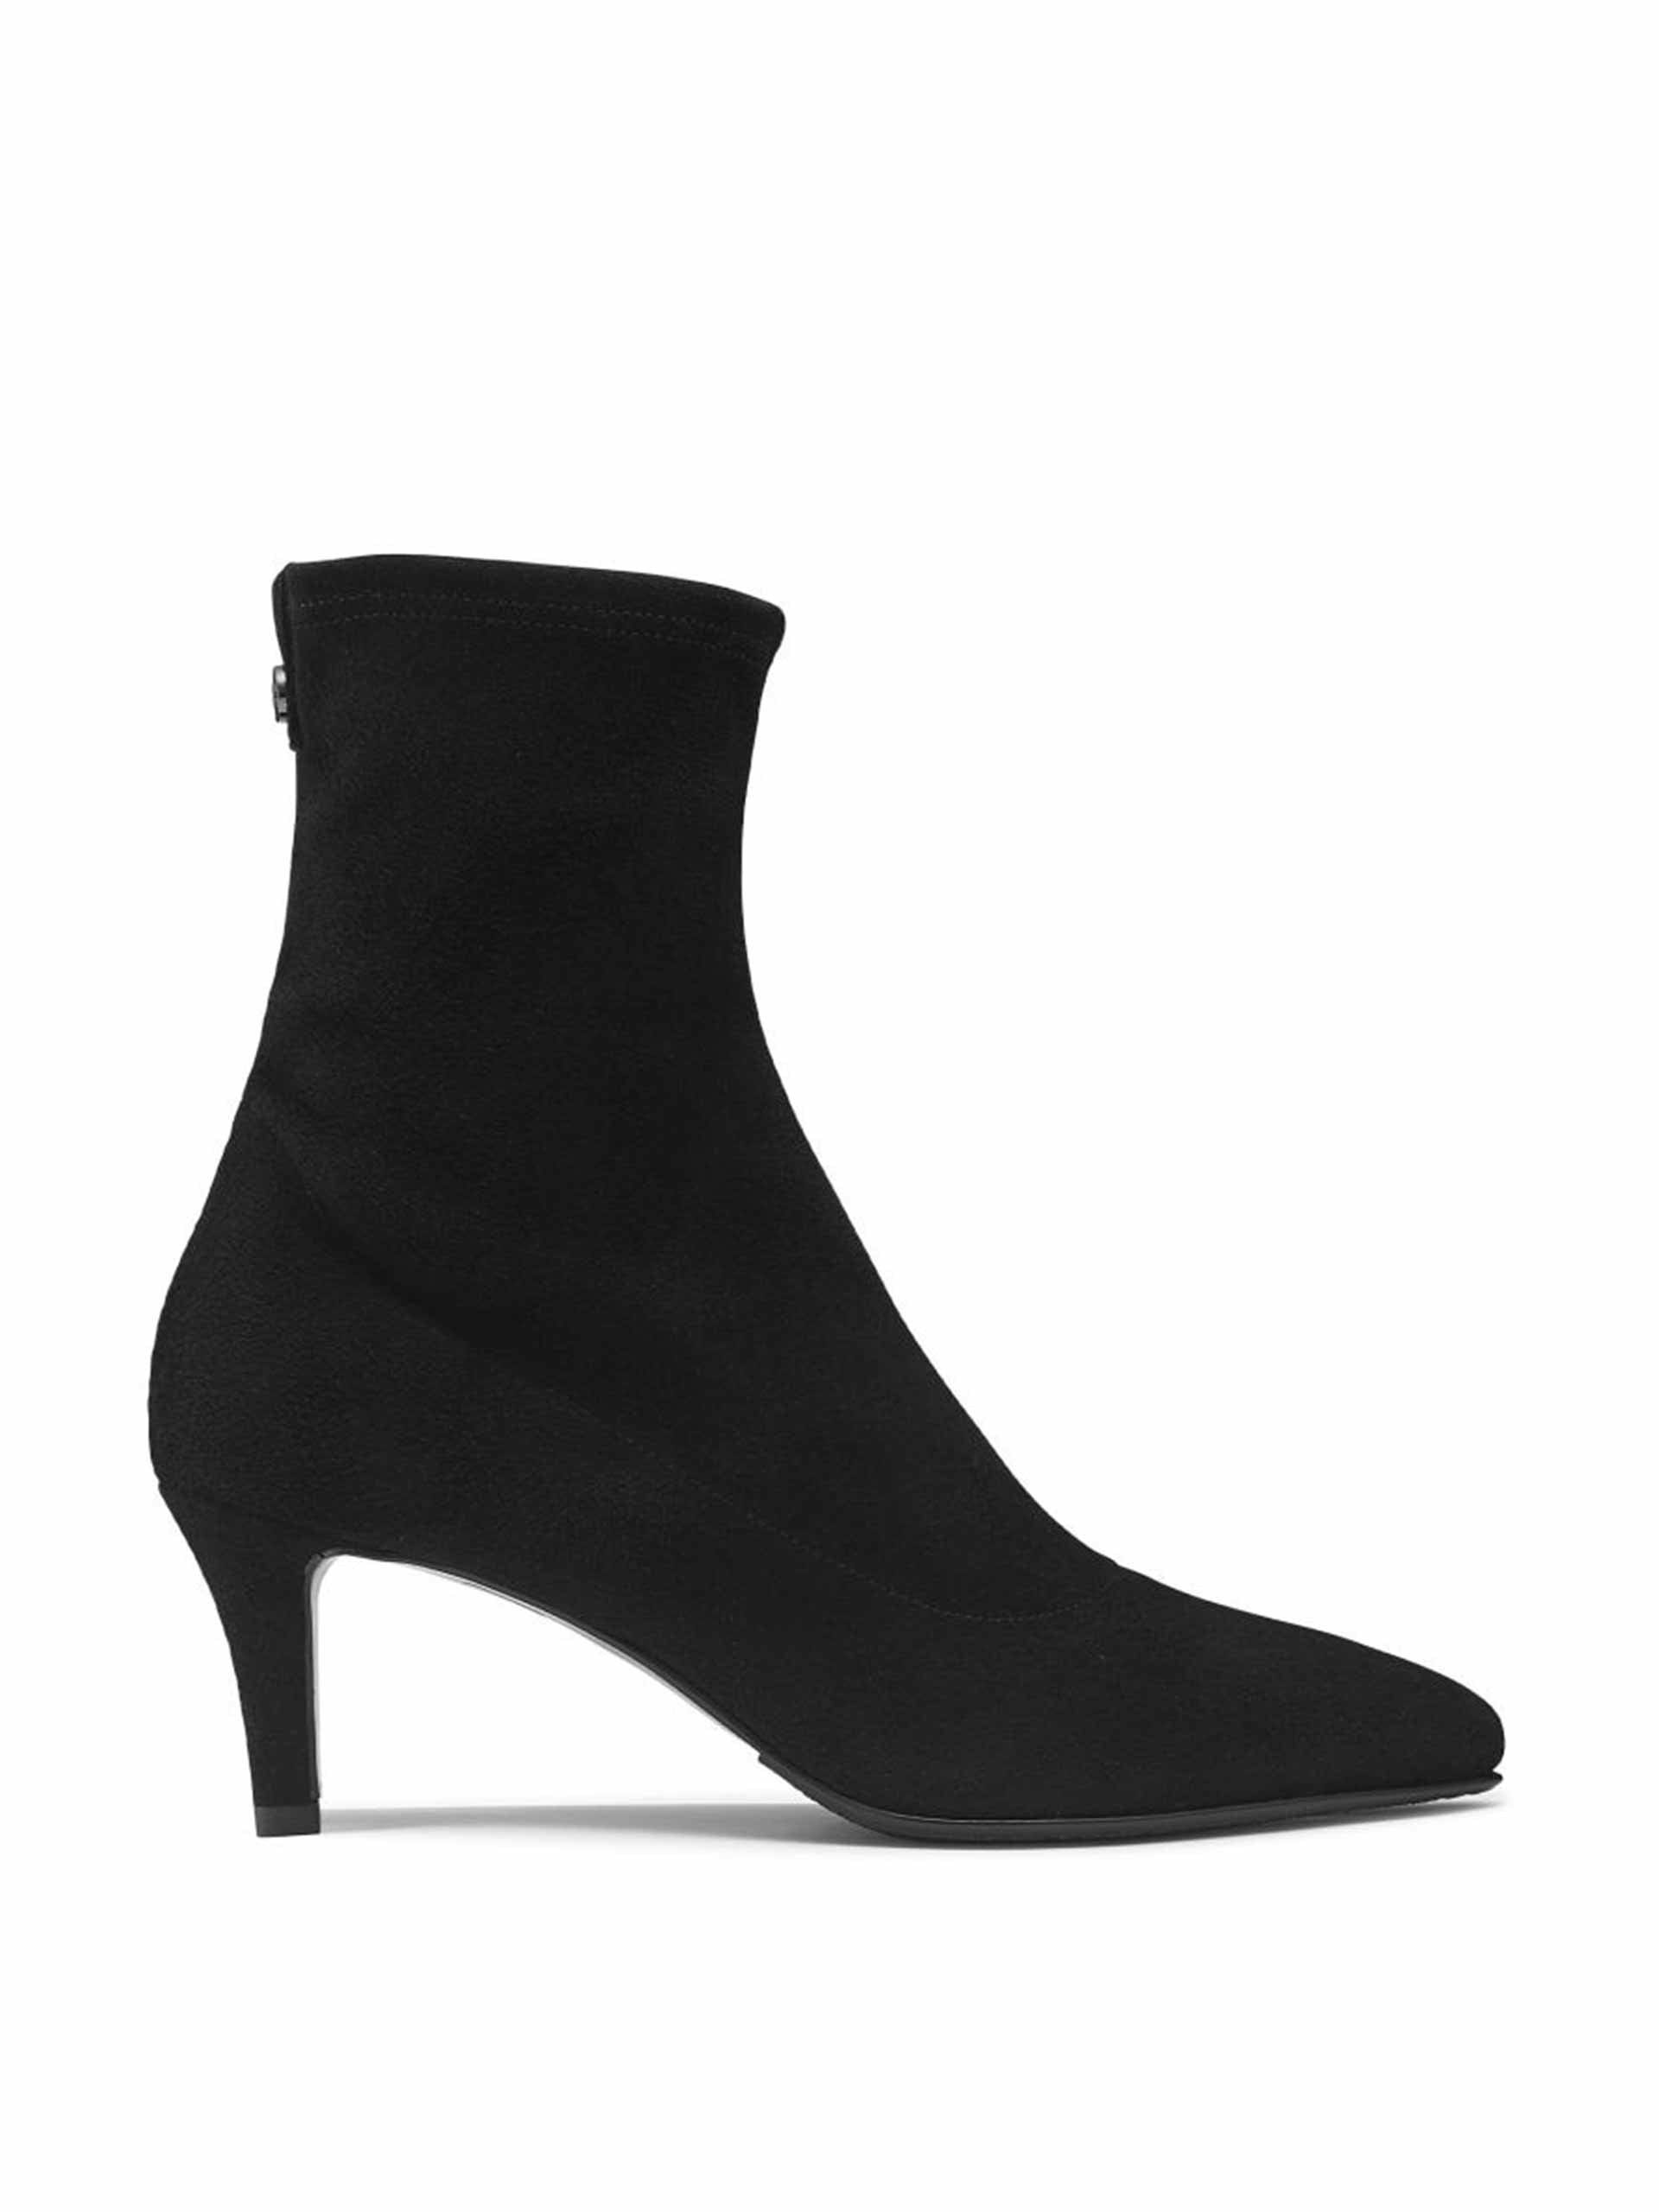 Black ankle sock boots